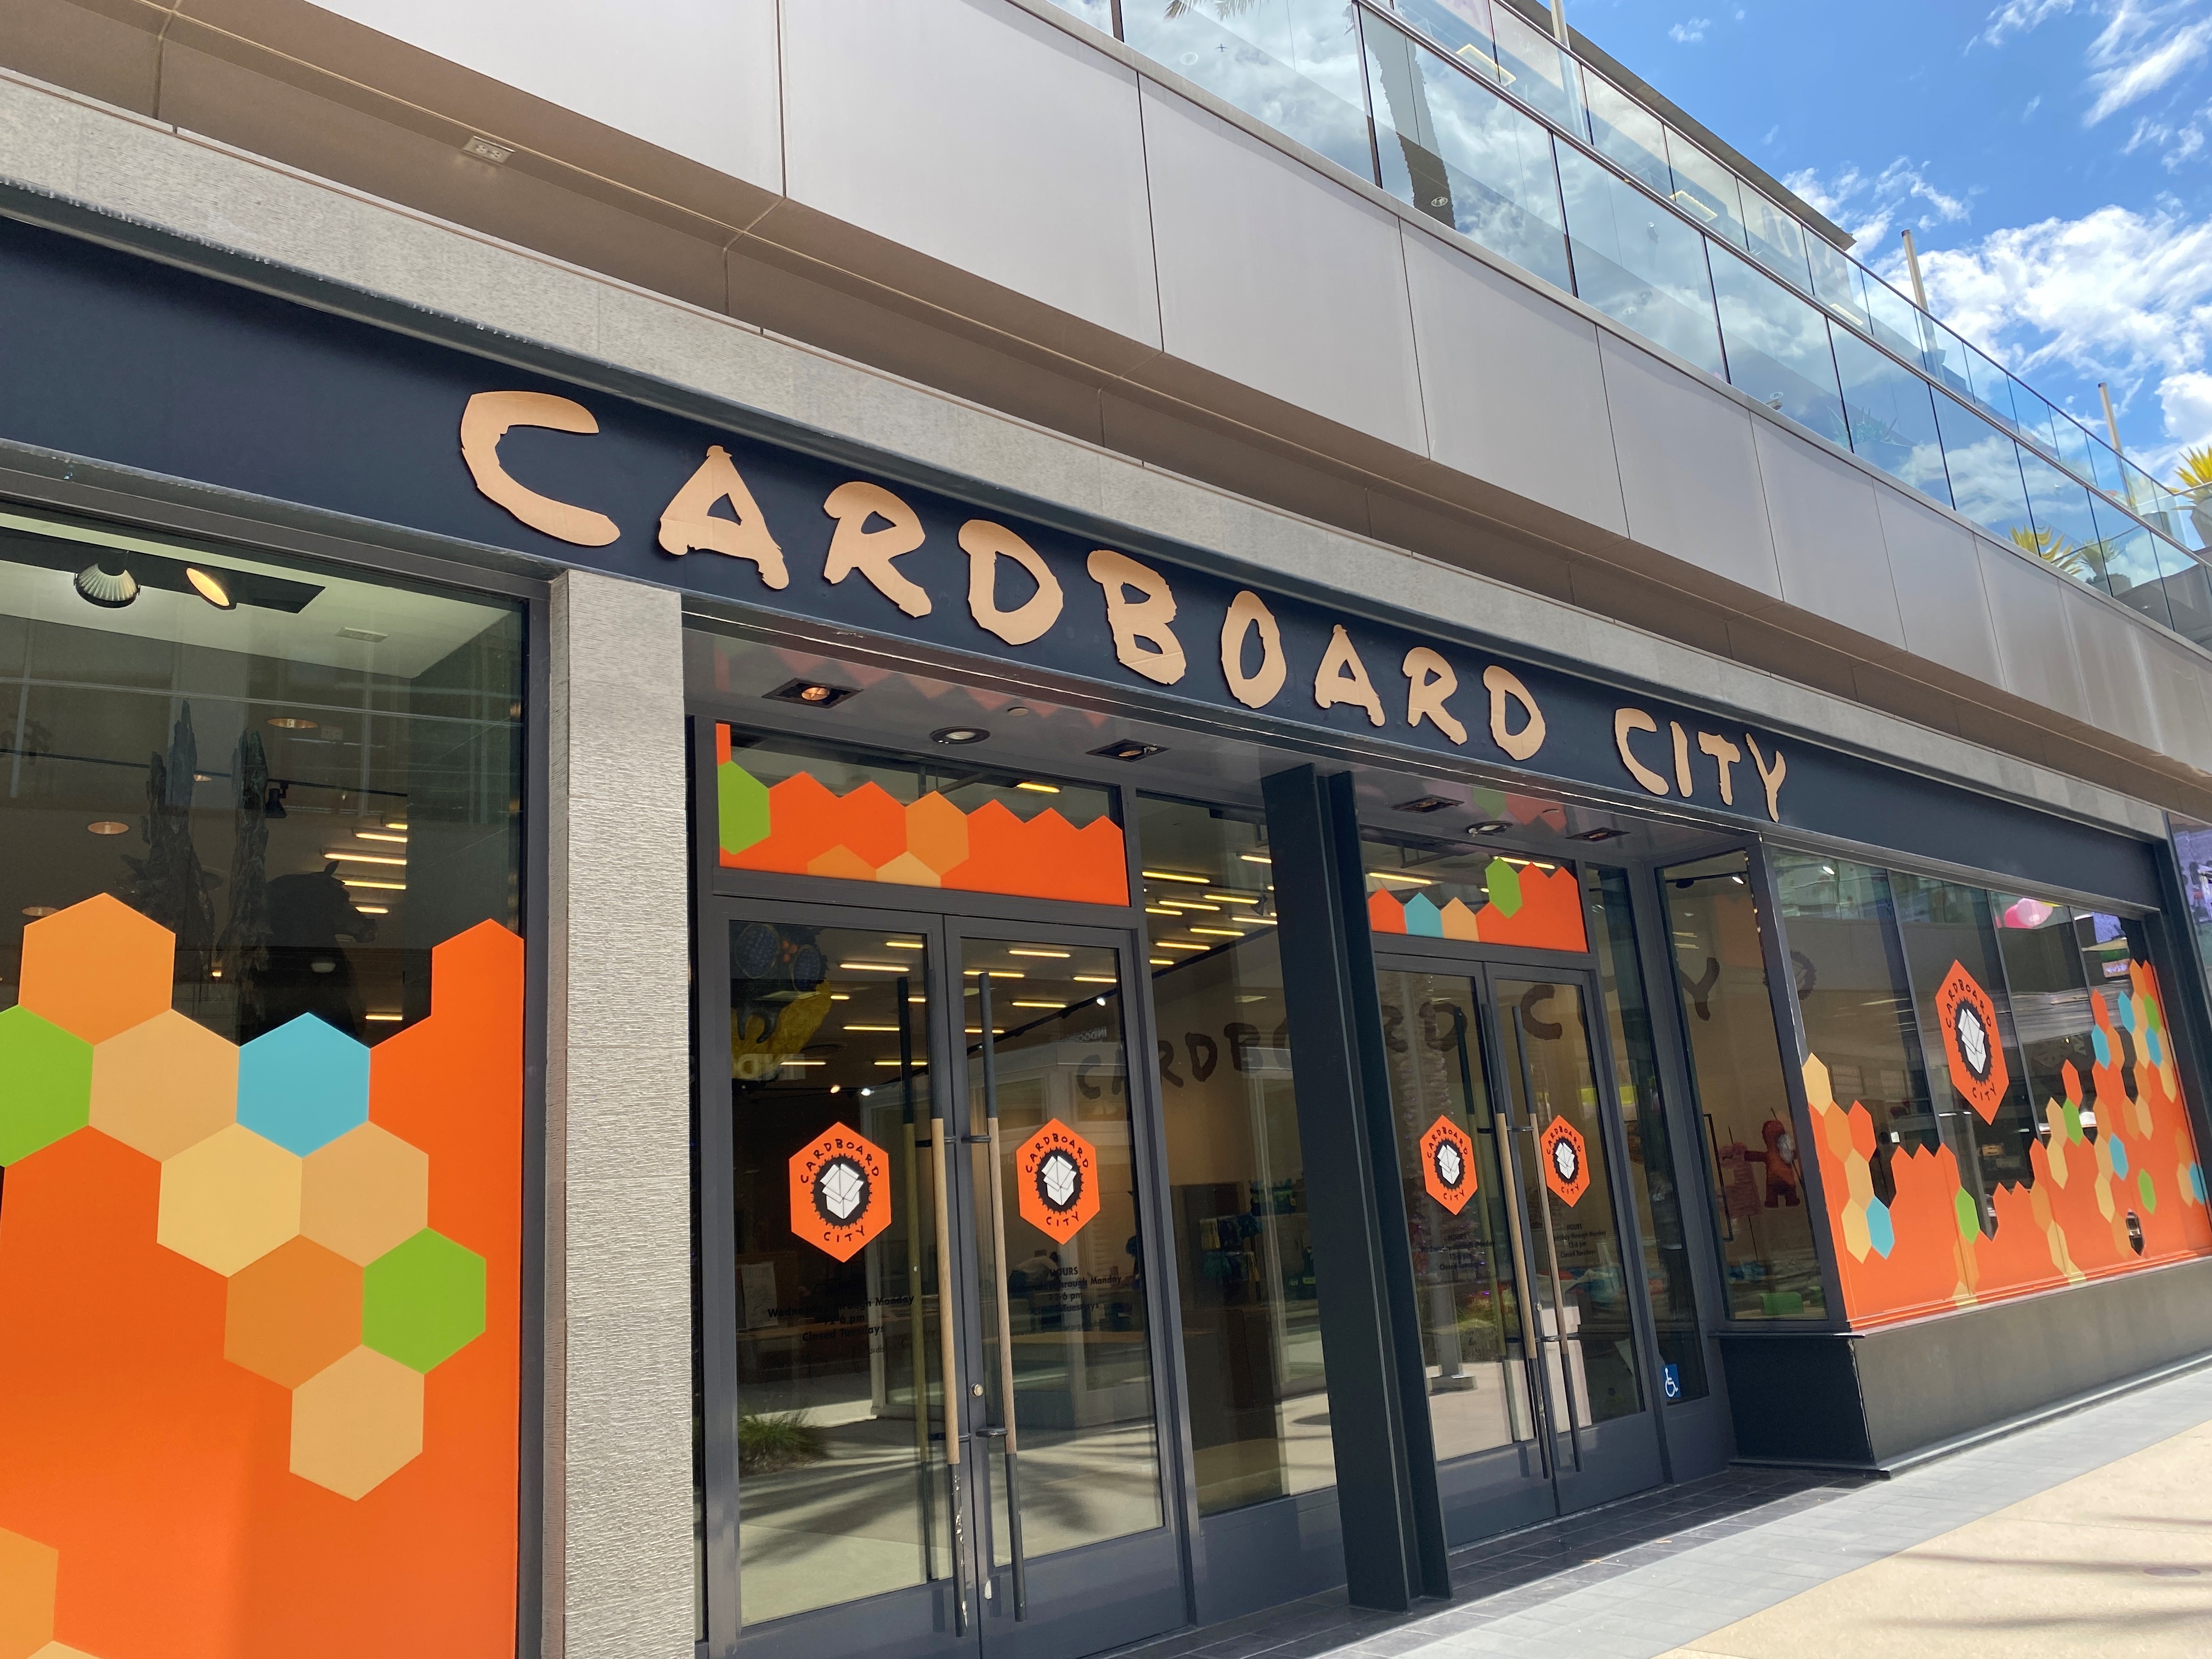 Cardboard city store front